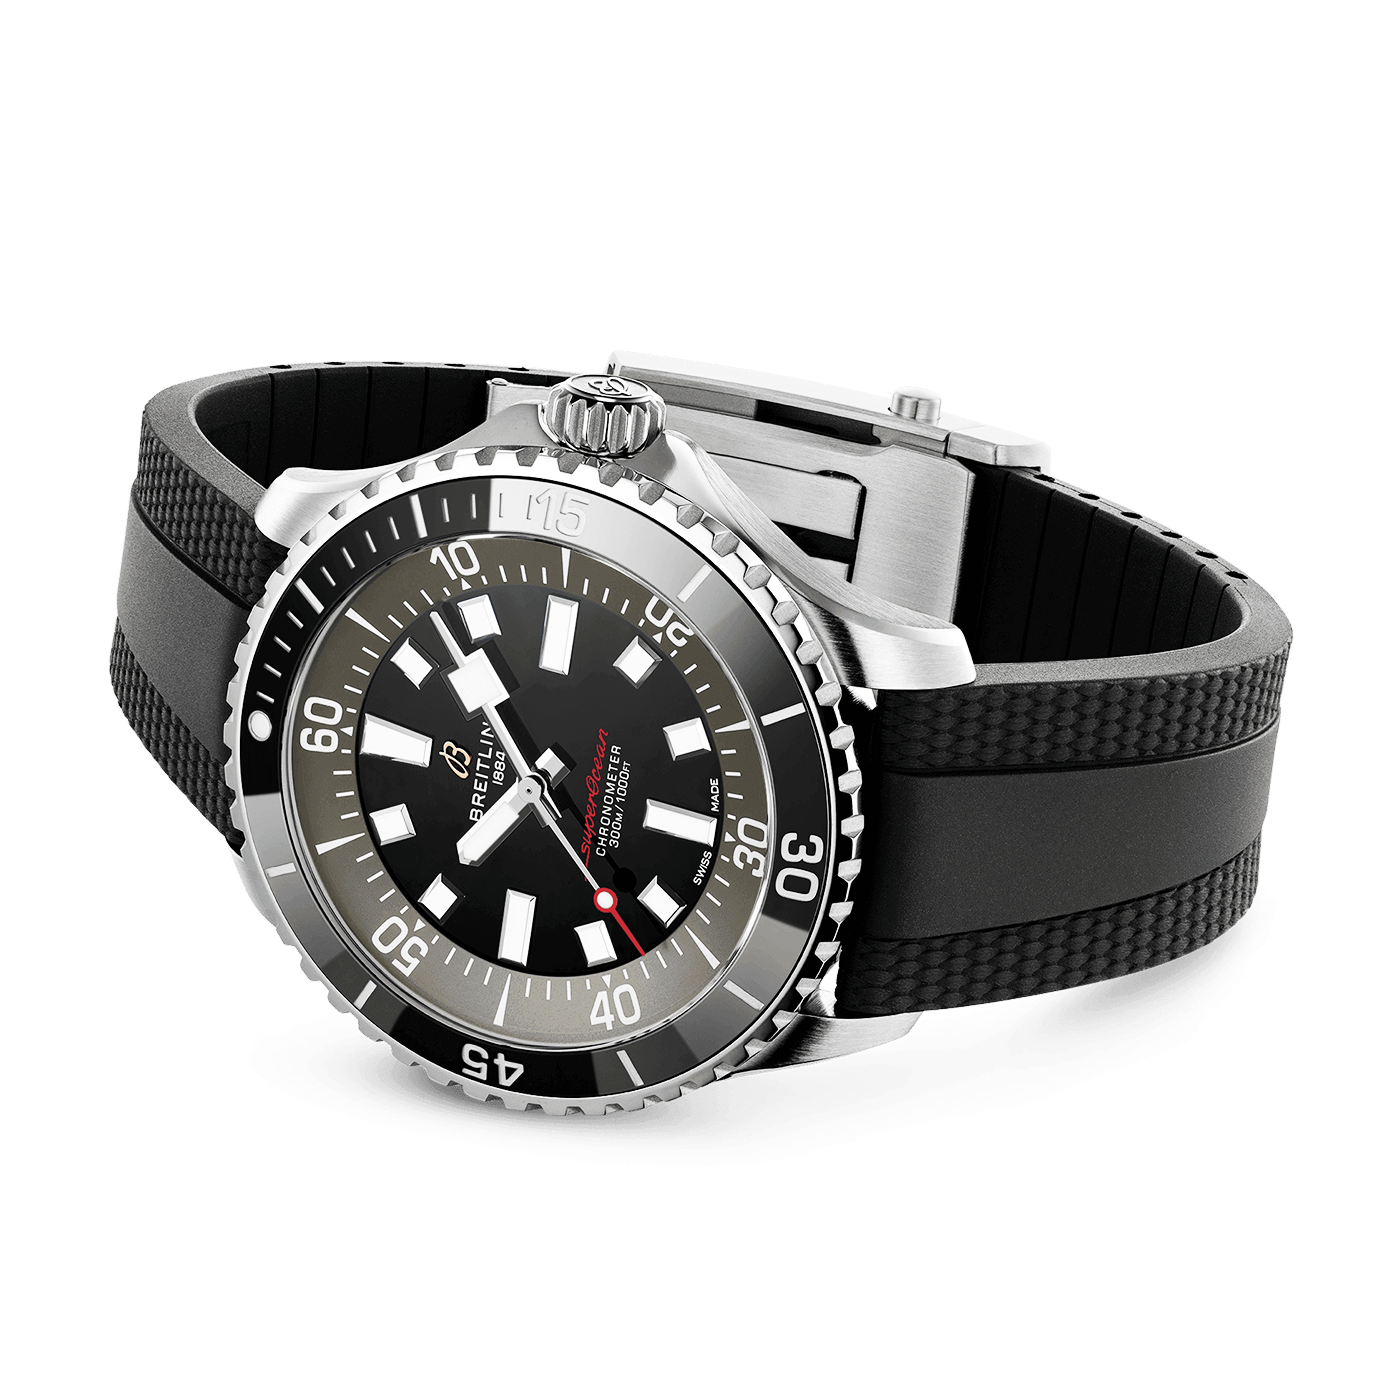 Superocean 44mm UK Limited Edition Rubber Strap Watch